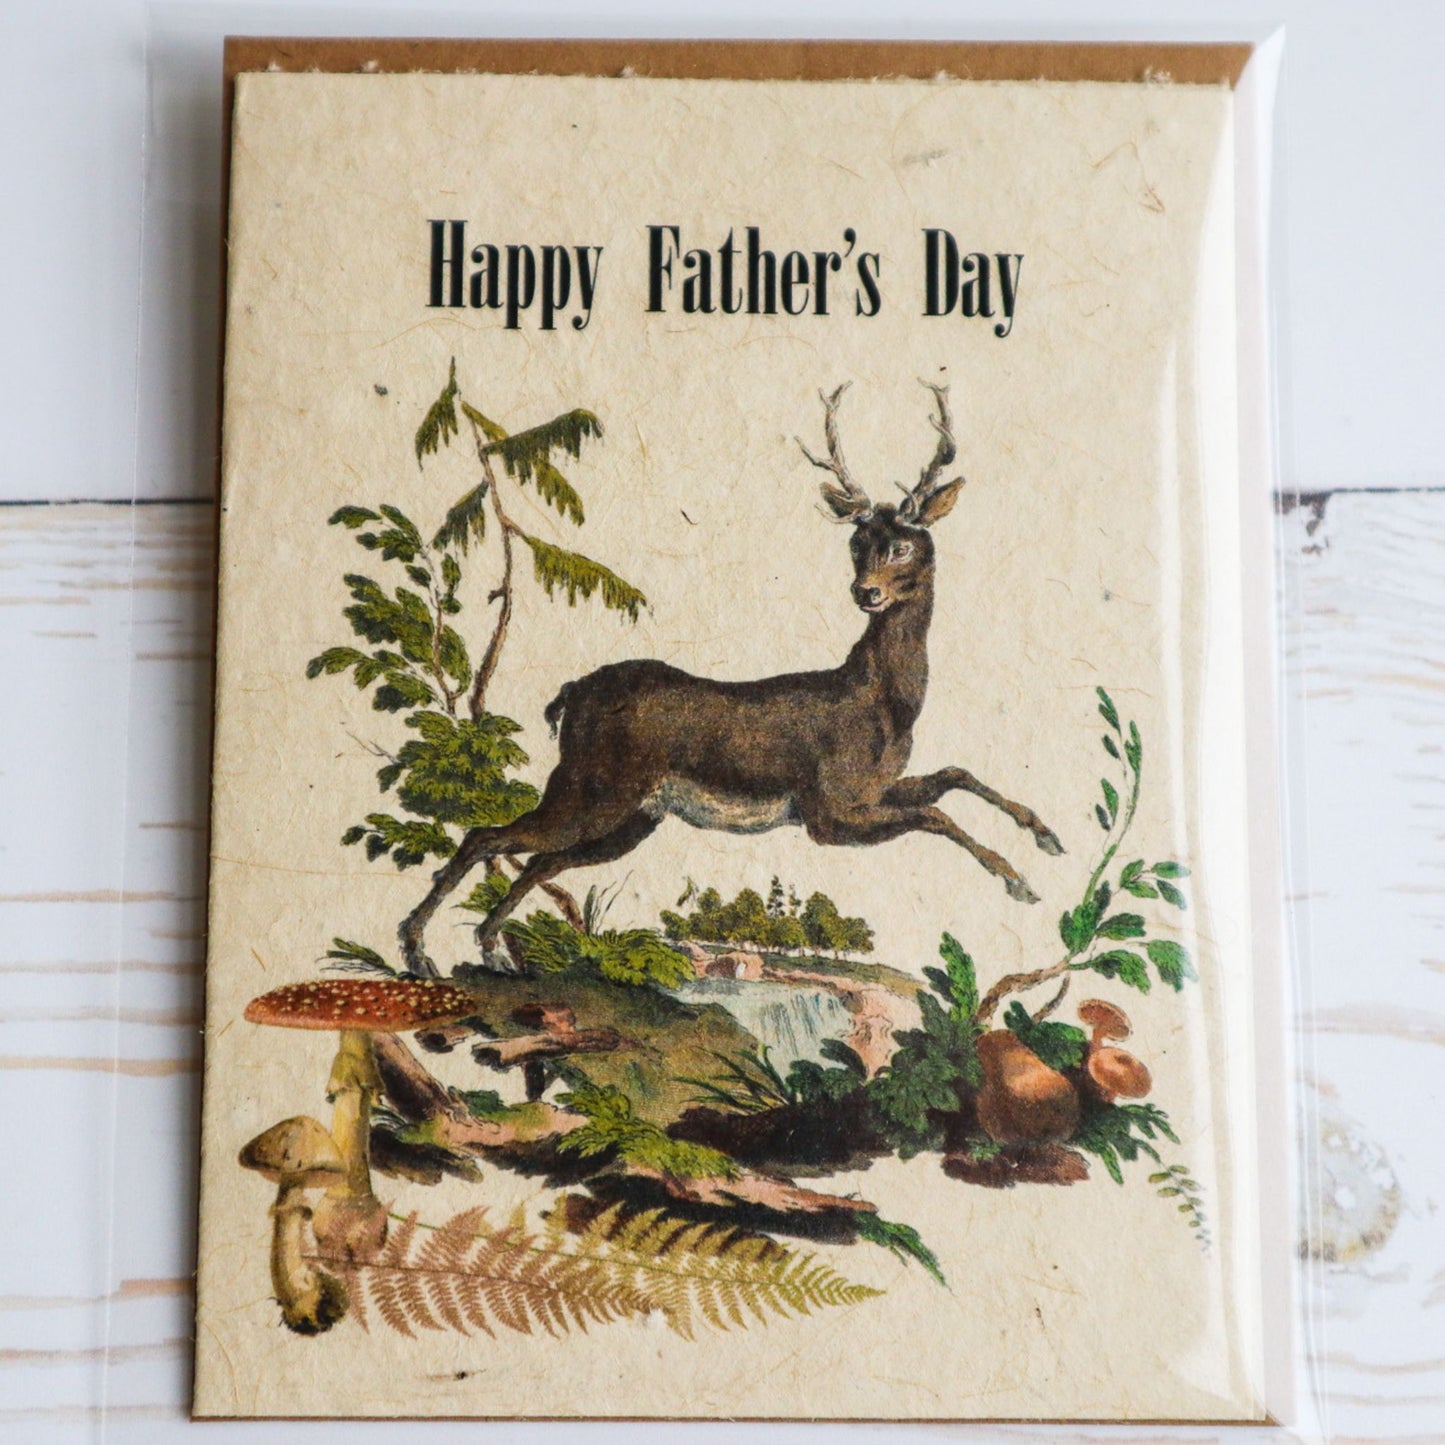 Happy Father's Day plantable flower seed paper card by Helen Jeanne Handmade with deer jumping, mushrooms, and river landscape.